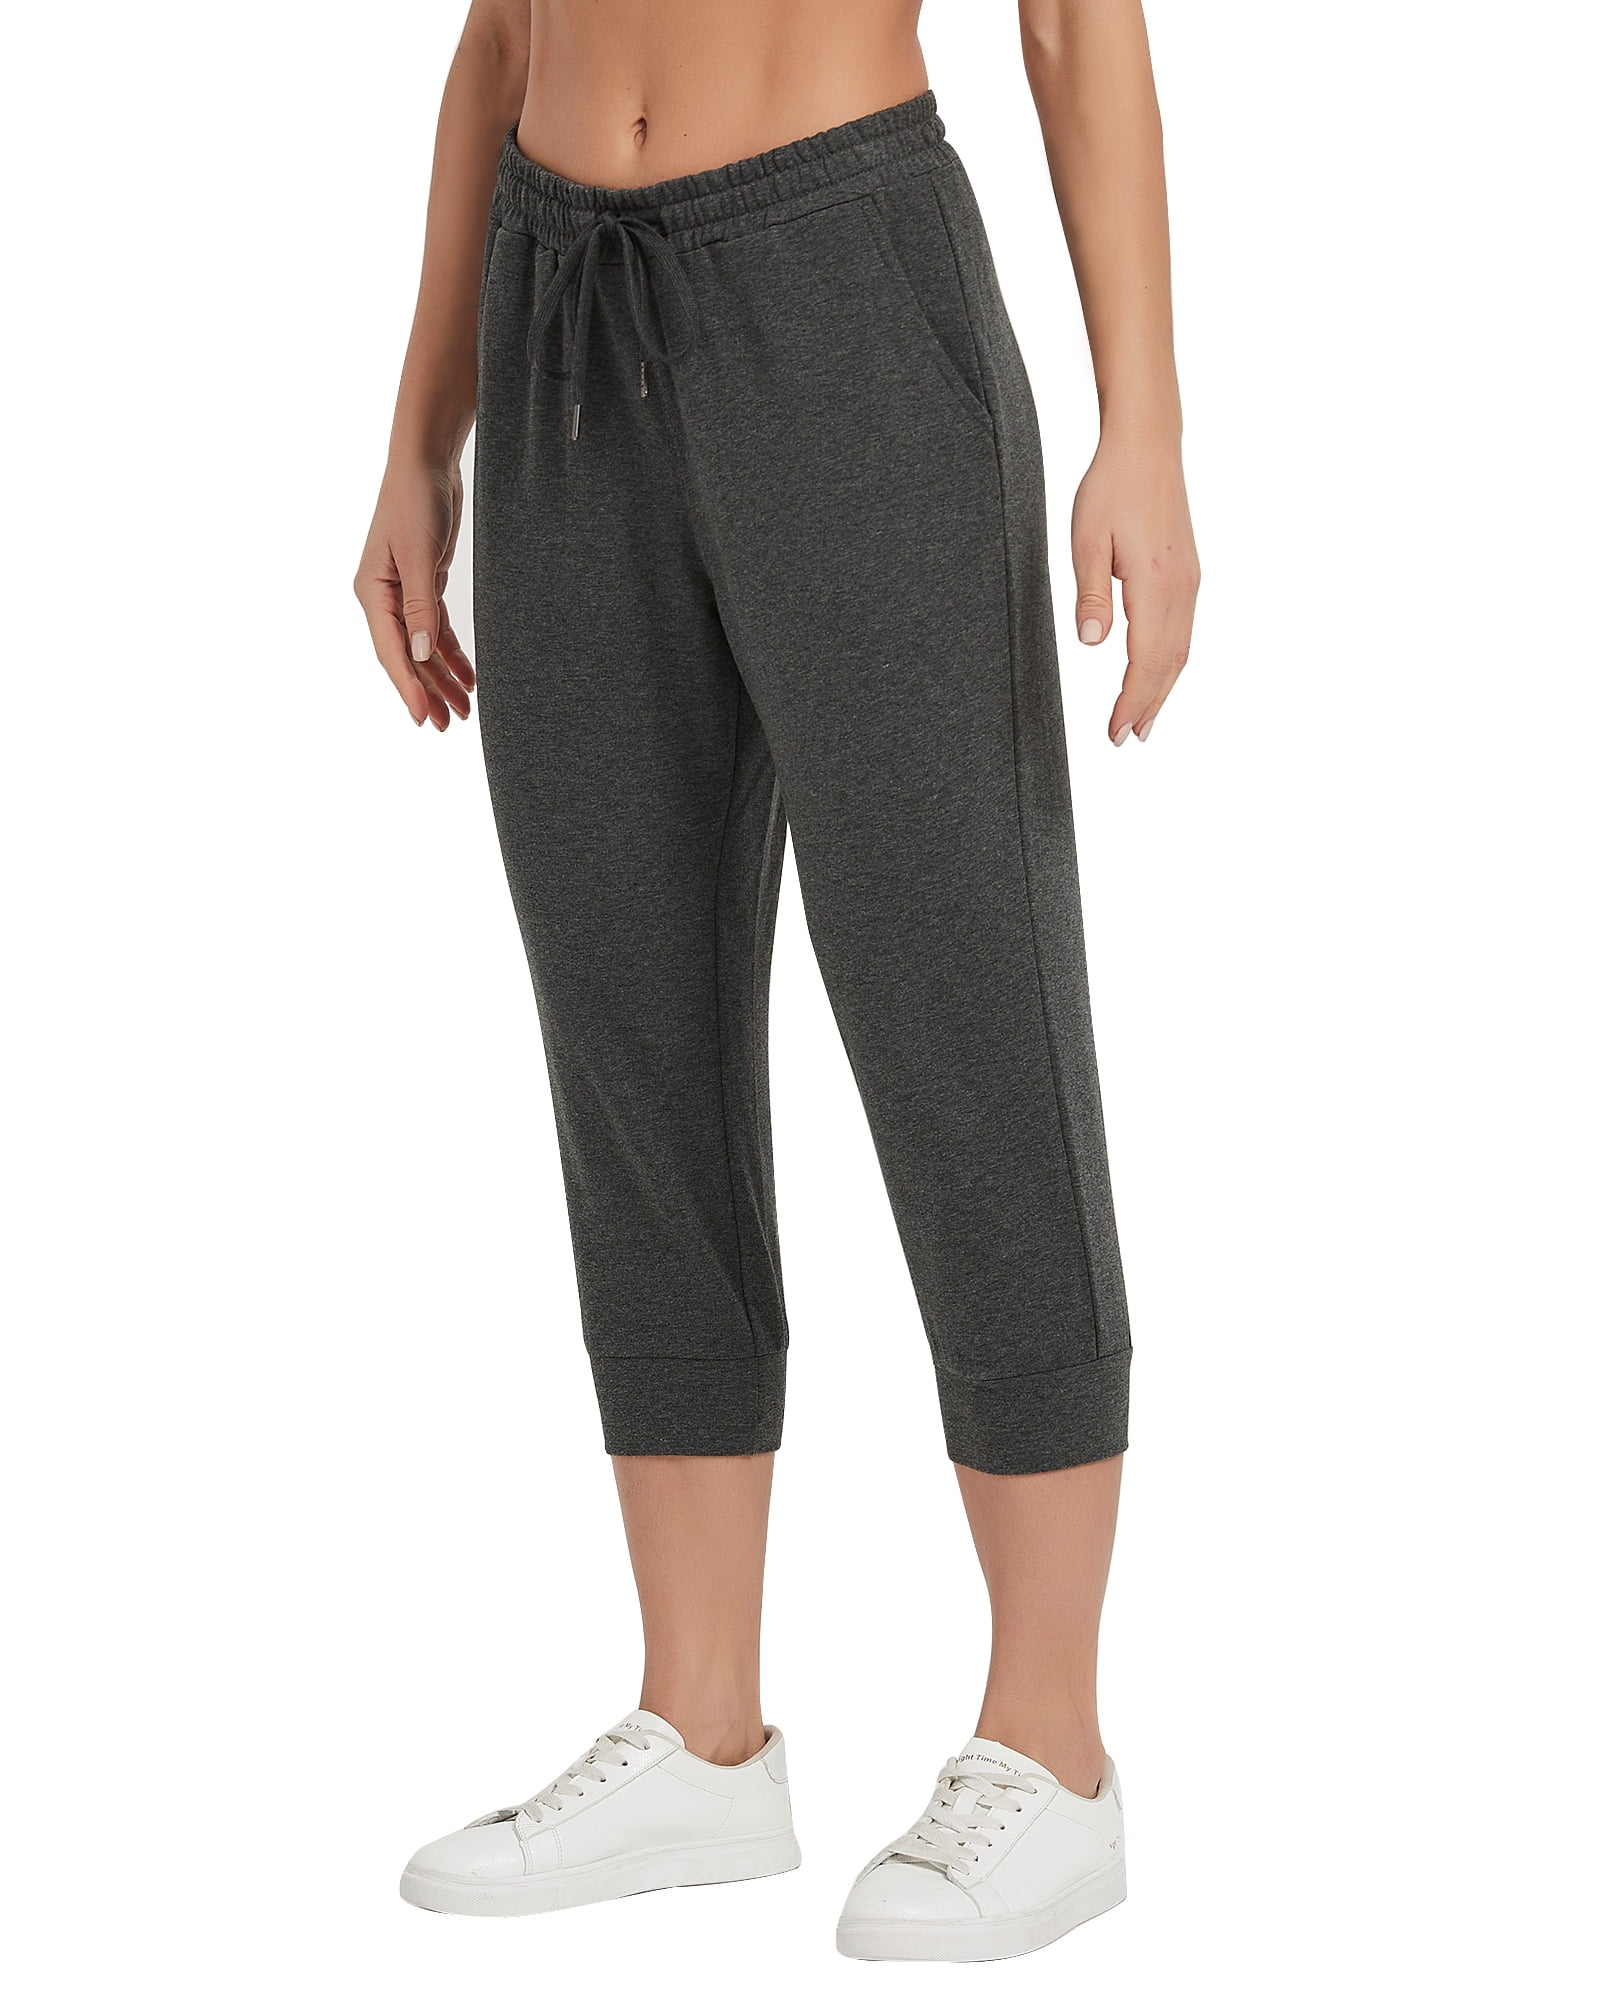 Stelle Women's Cotton Capri Joggers Pants with Side Pockets Workout  Sweatpants,Drawstring Waist Running Yoga Athletic Tapered Casual Pants  Lightweight Lounge Pants 20,XS-XXL Gray 